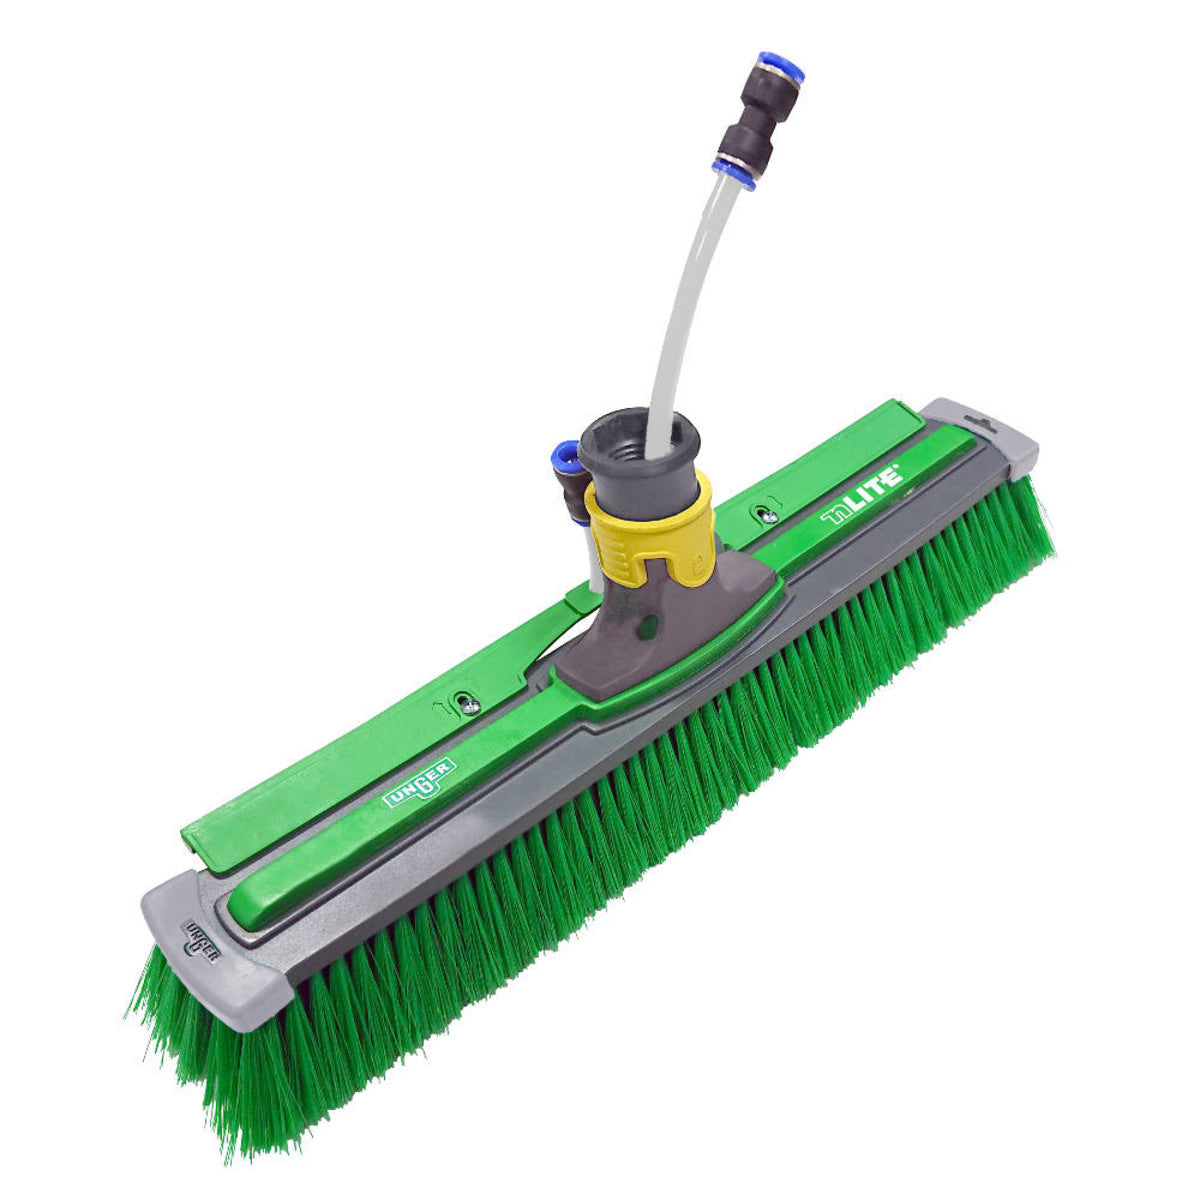 Unger nLITE® Powerbrush Complete Flagged